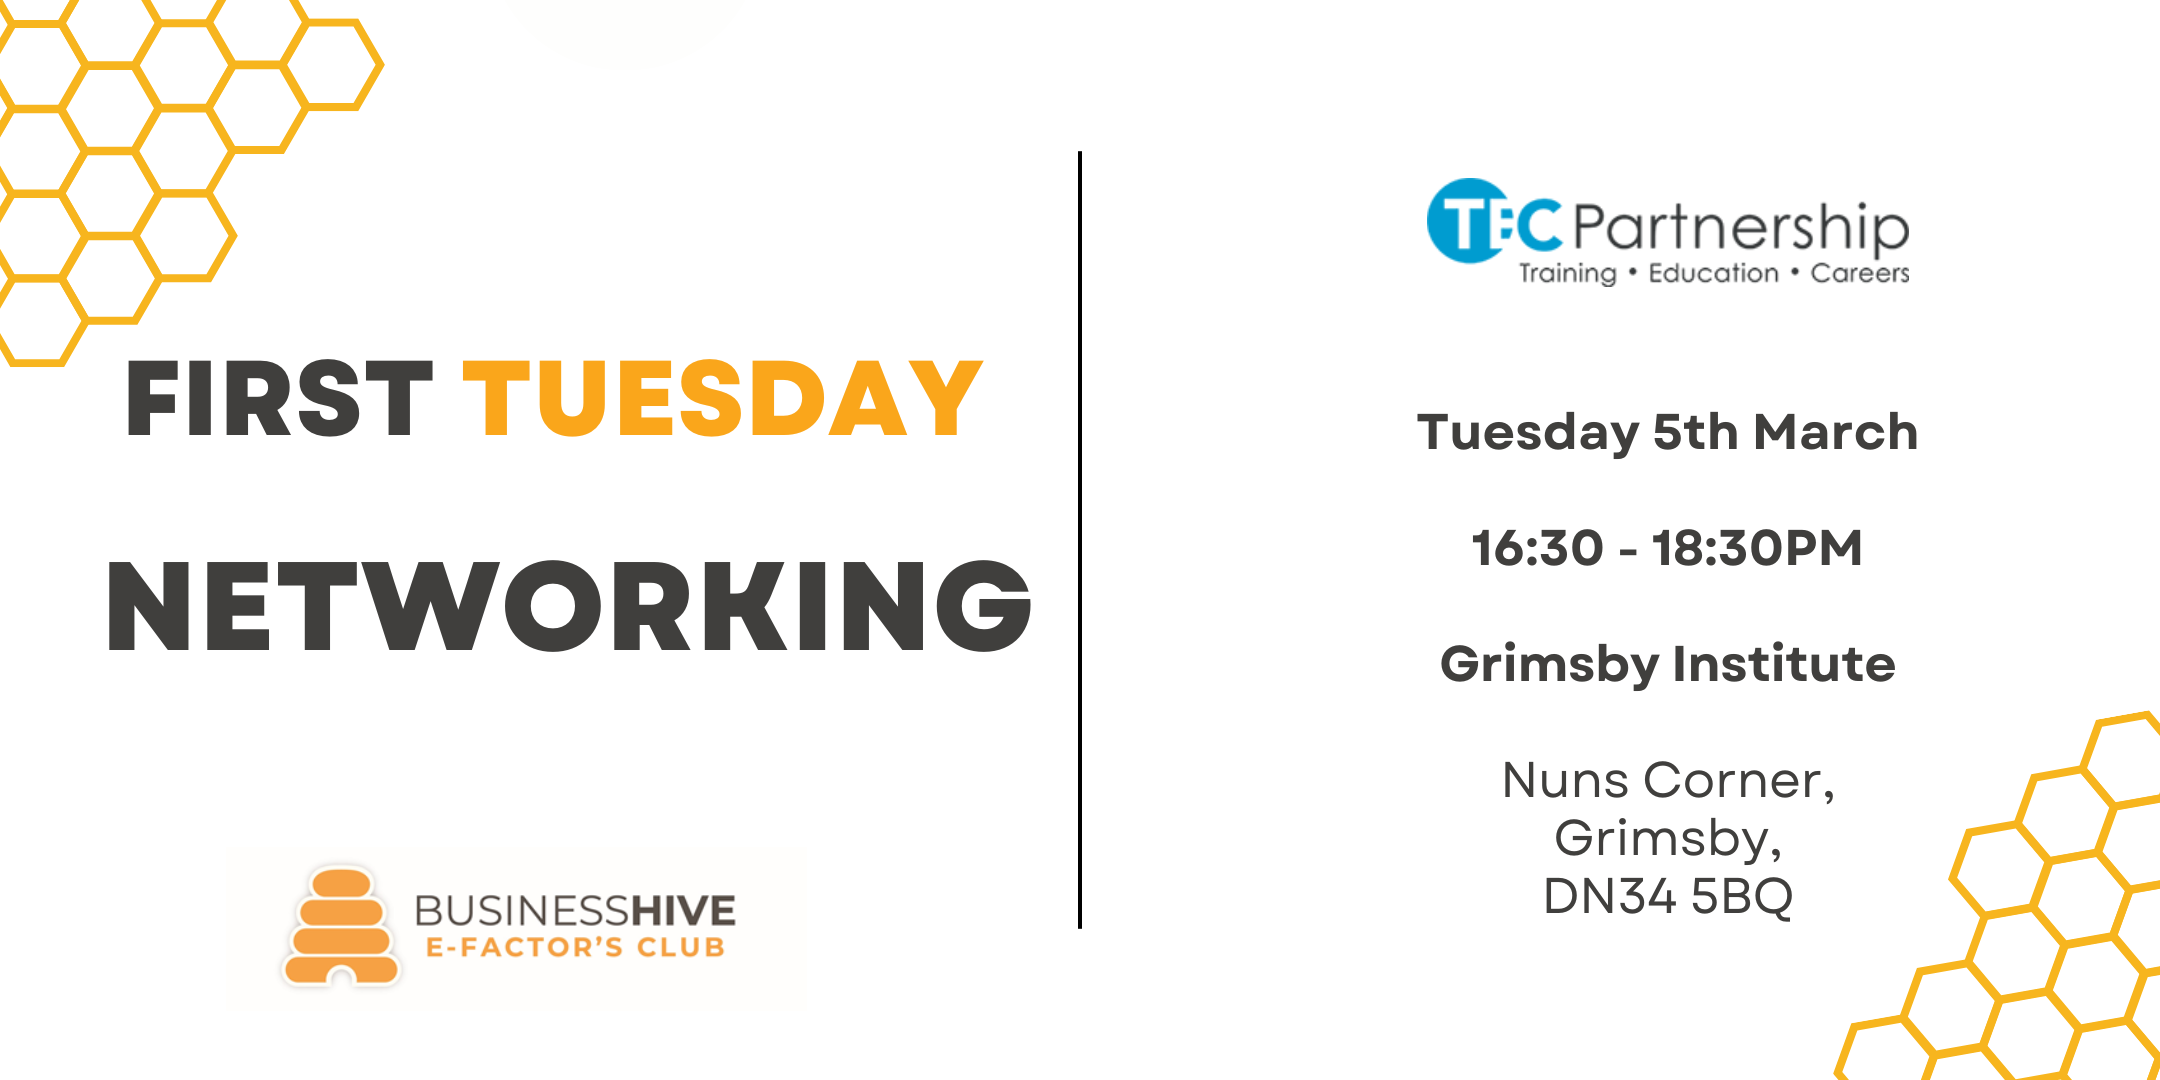 Join us for our monthly First Tuesday networking event.